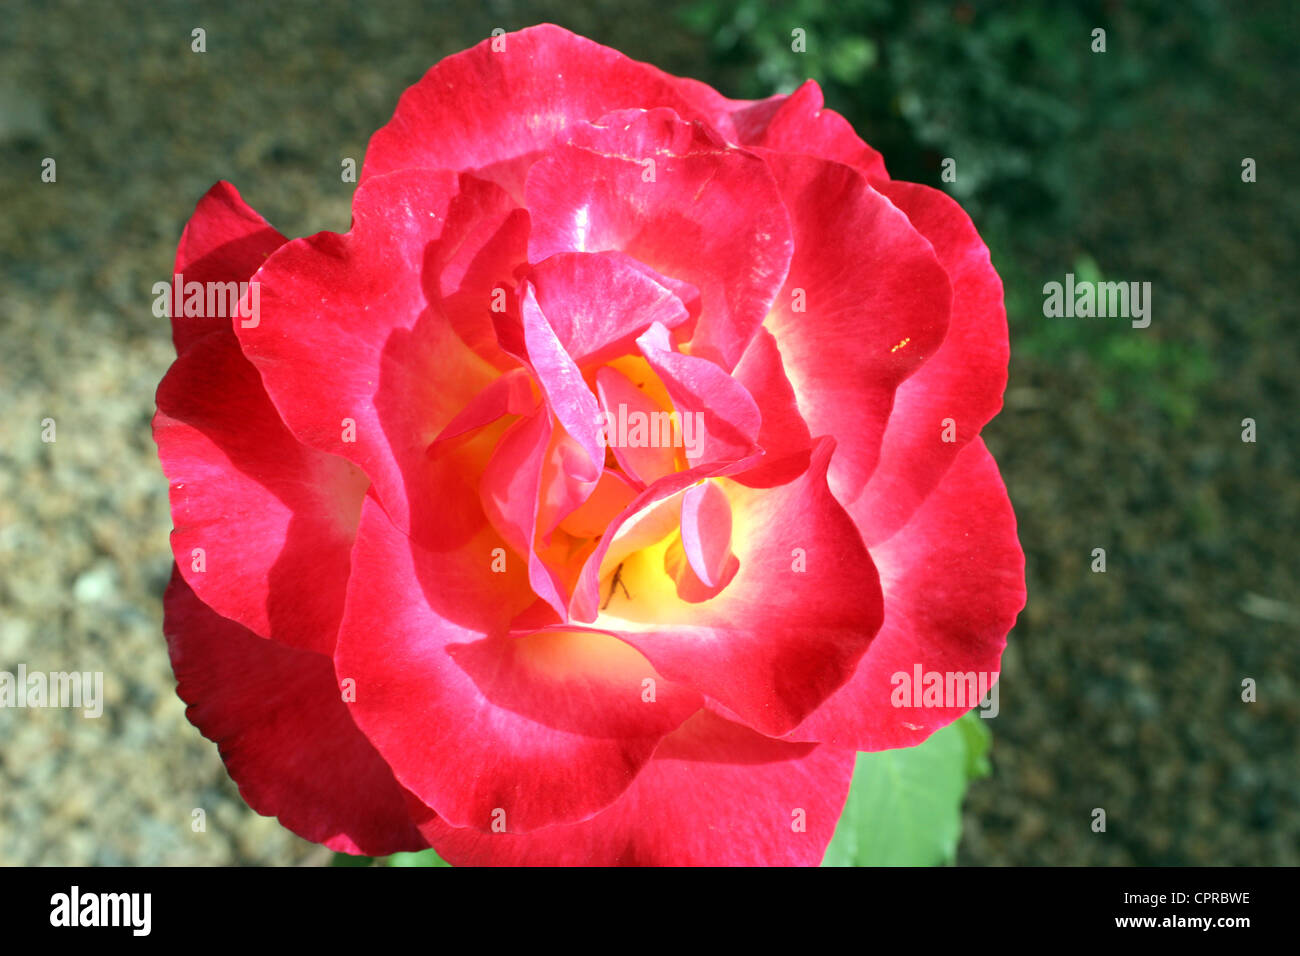 A Red rose flower Stock Photo